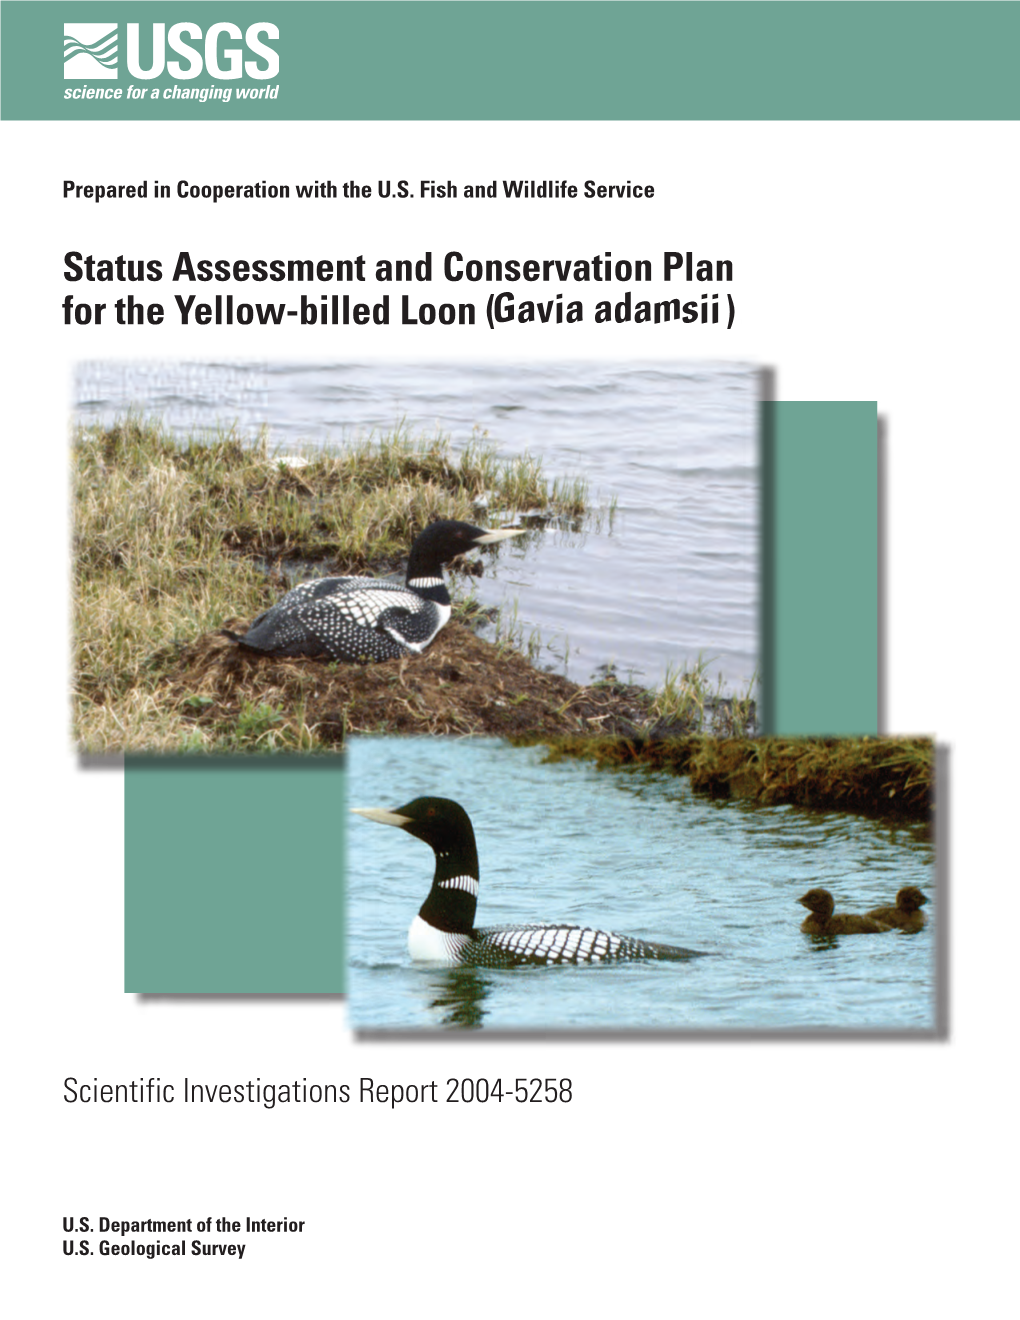 Status Assessment and Conservation Plan for the Yellow-Billed Loon (Gavia Adamsii)